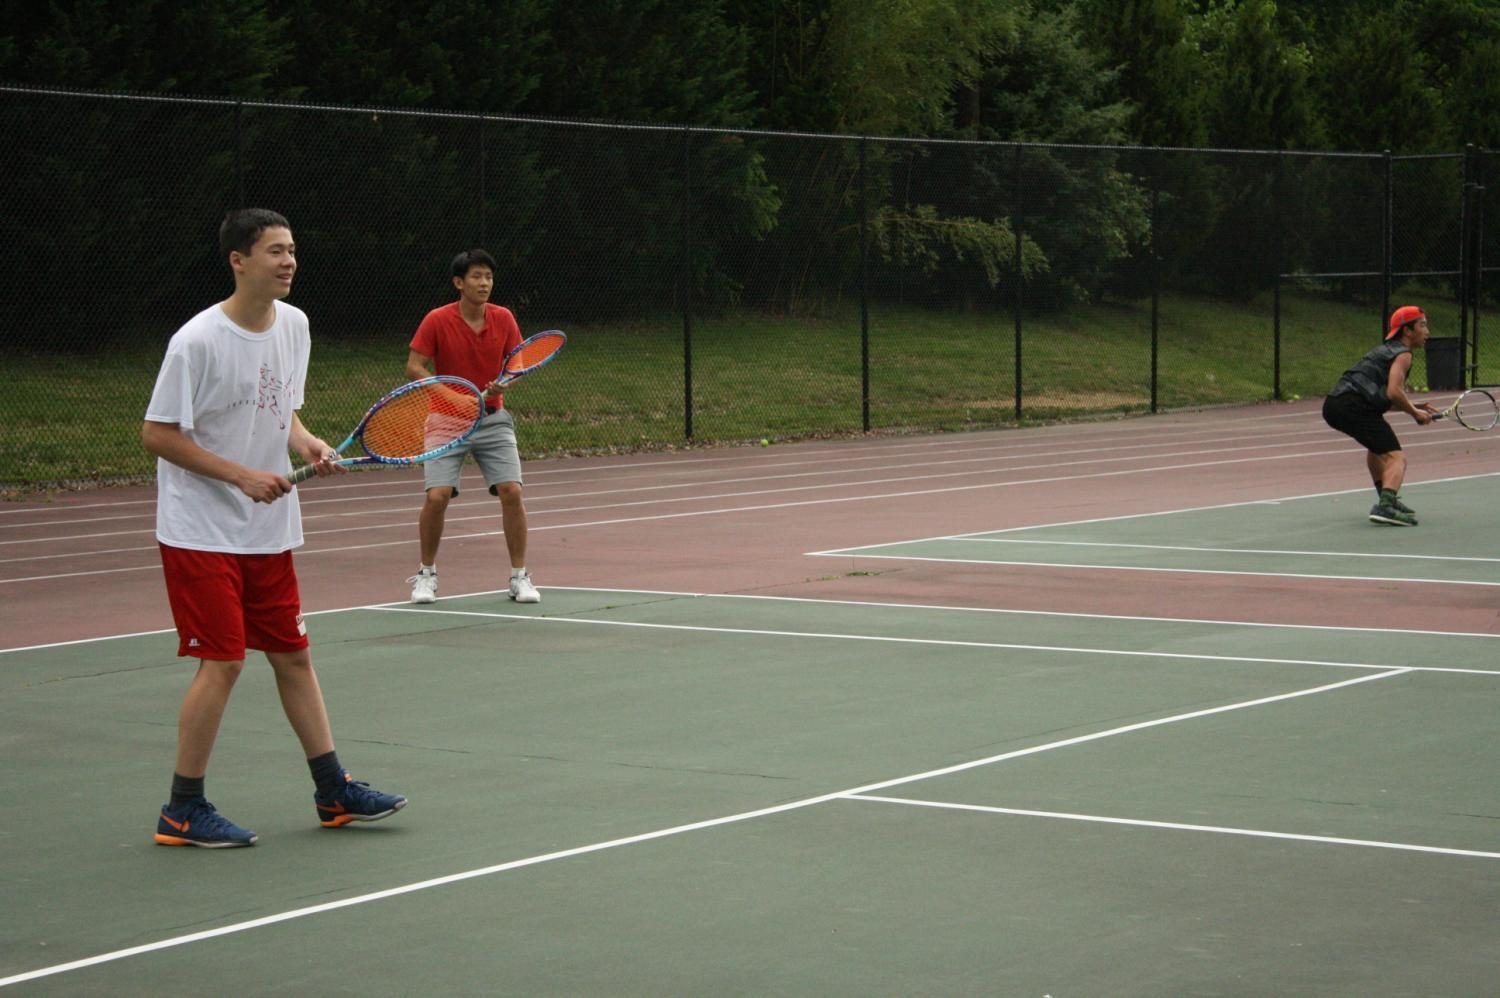 Freshman William Vroom and Senior Ruyan Zhang practice ahead of the state championship. Hard work and practice makes quality tennis players who can win championships.